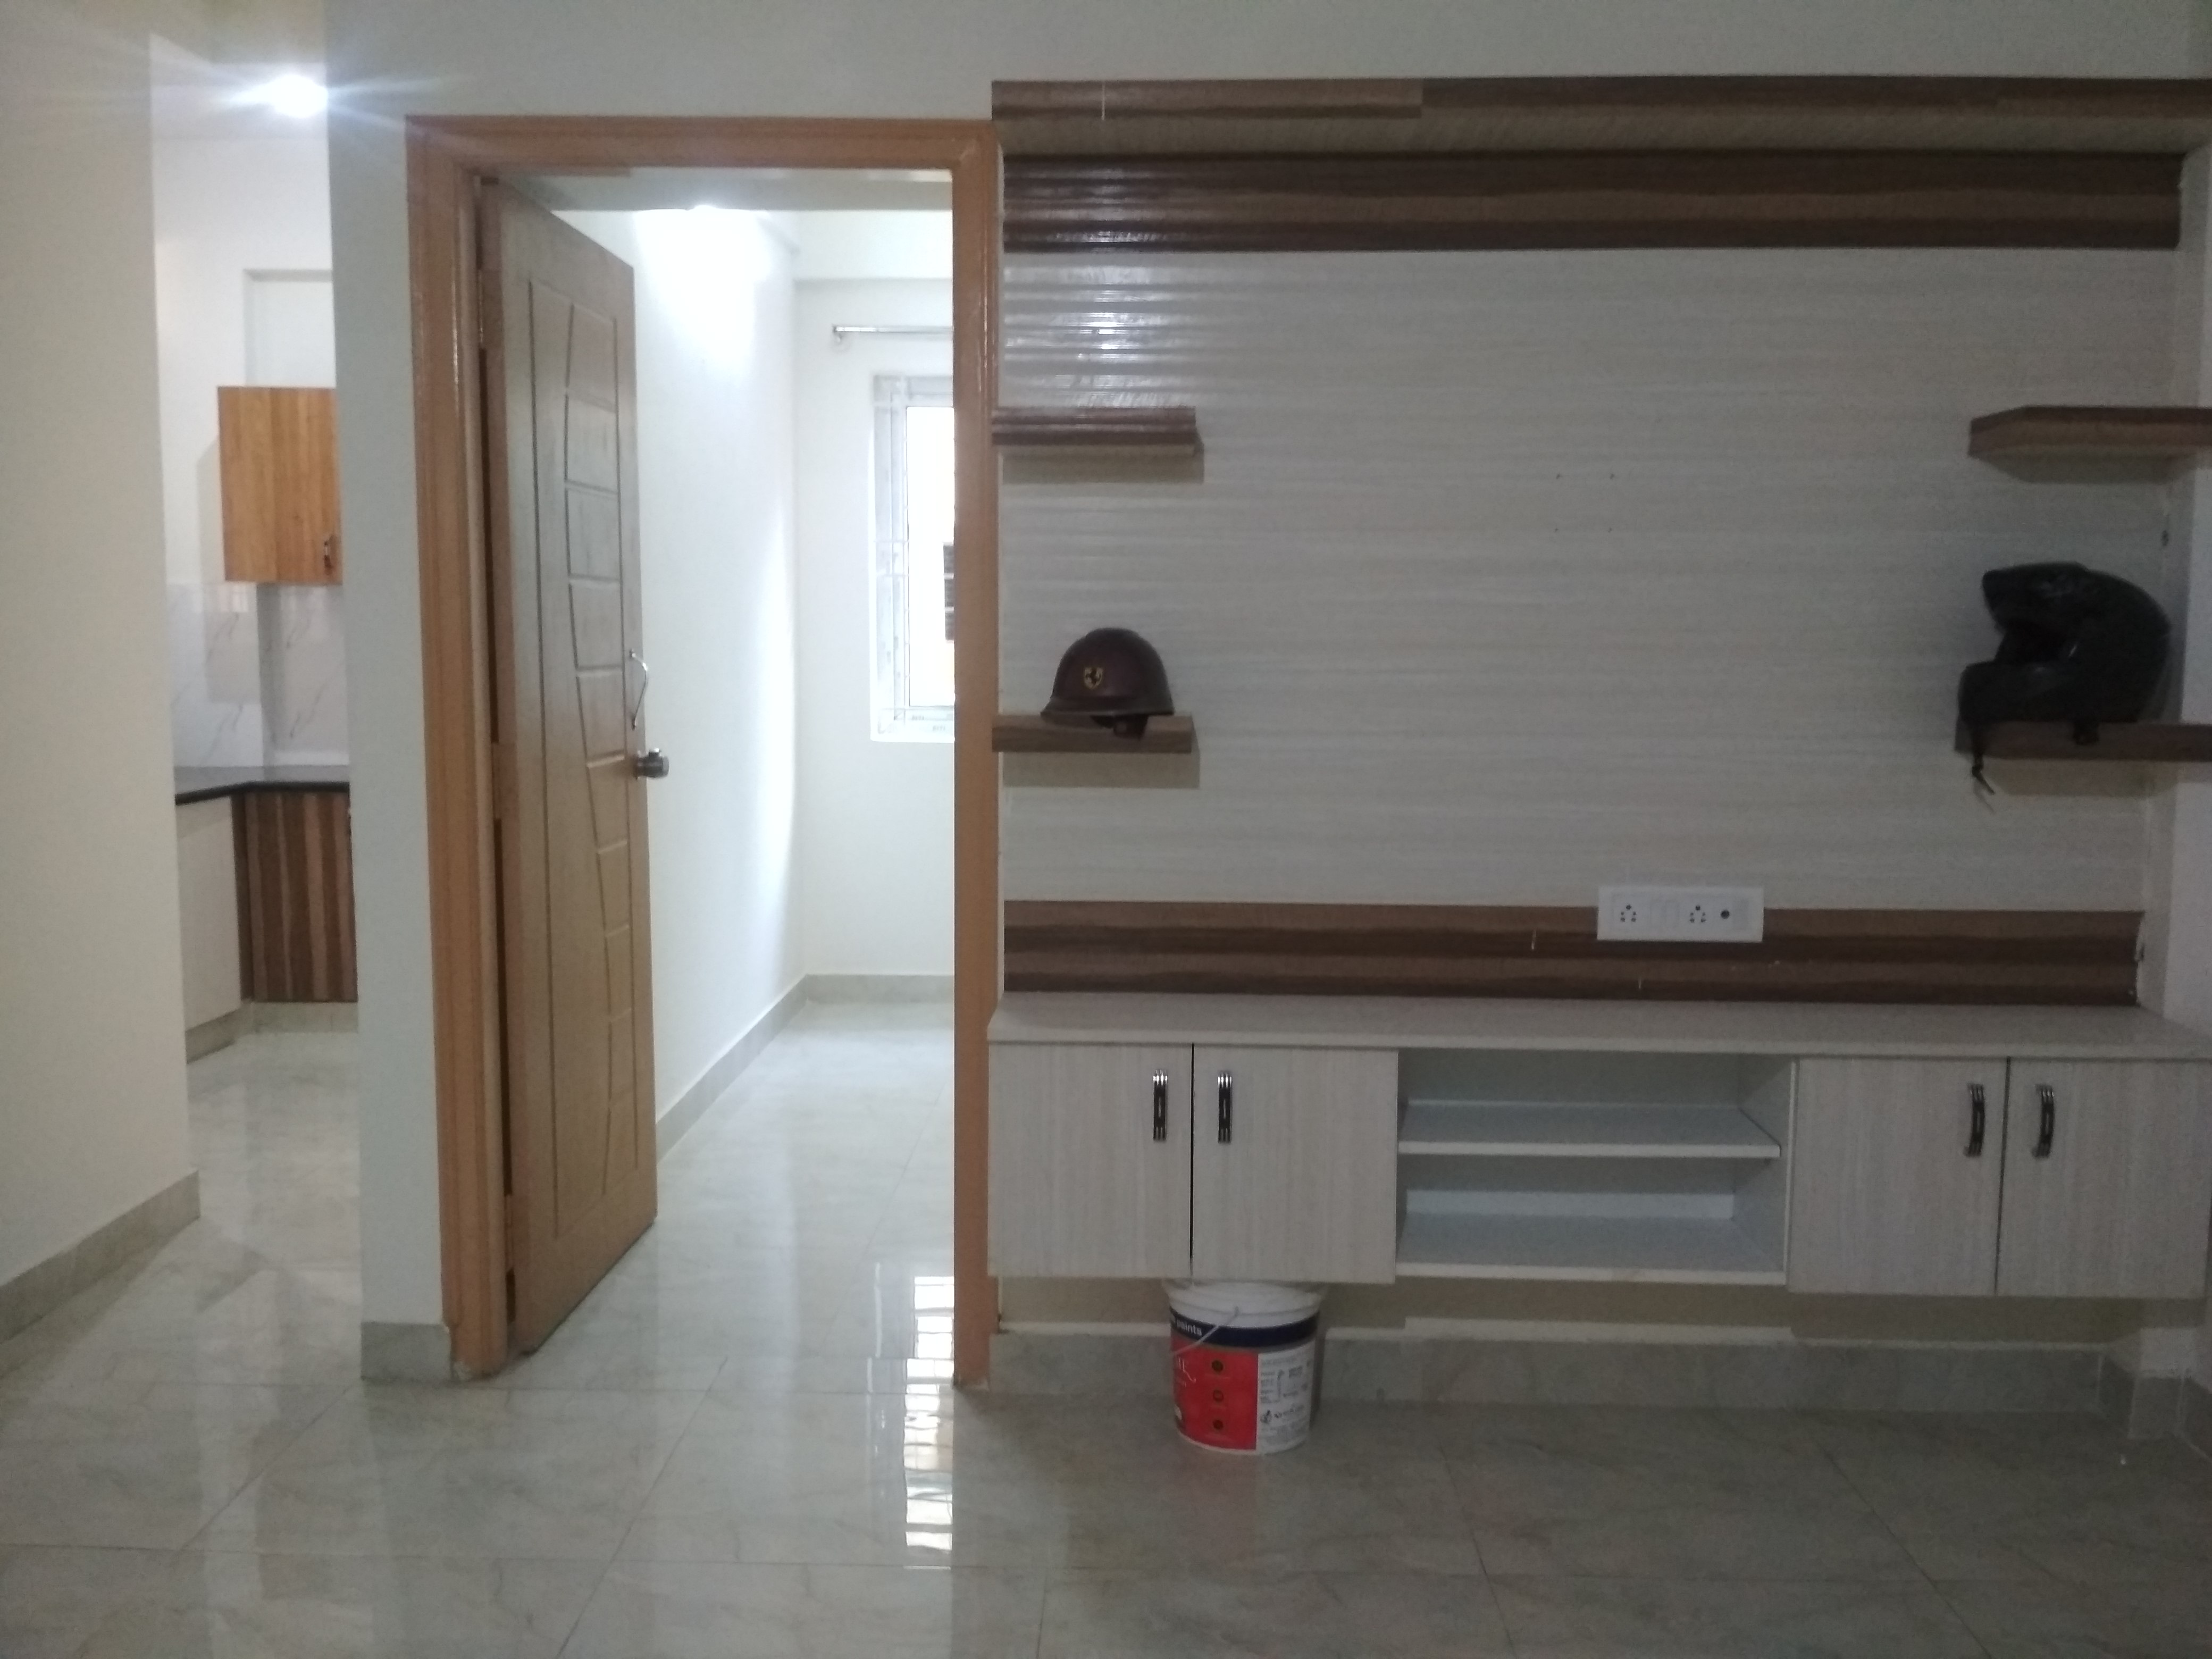 2 BHK House For Rent in Konena Agrahara Bangalore -ToleBoardReal EstateAll India